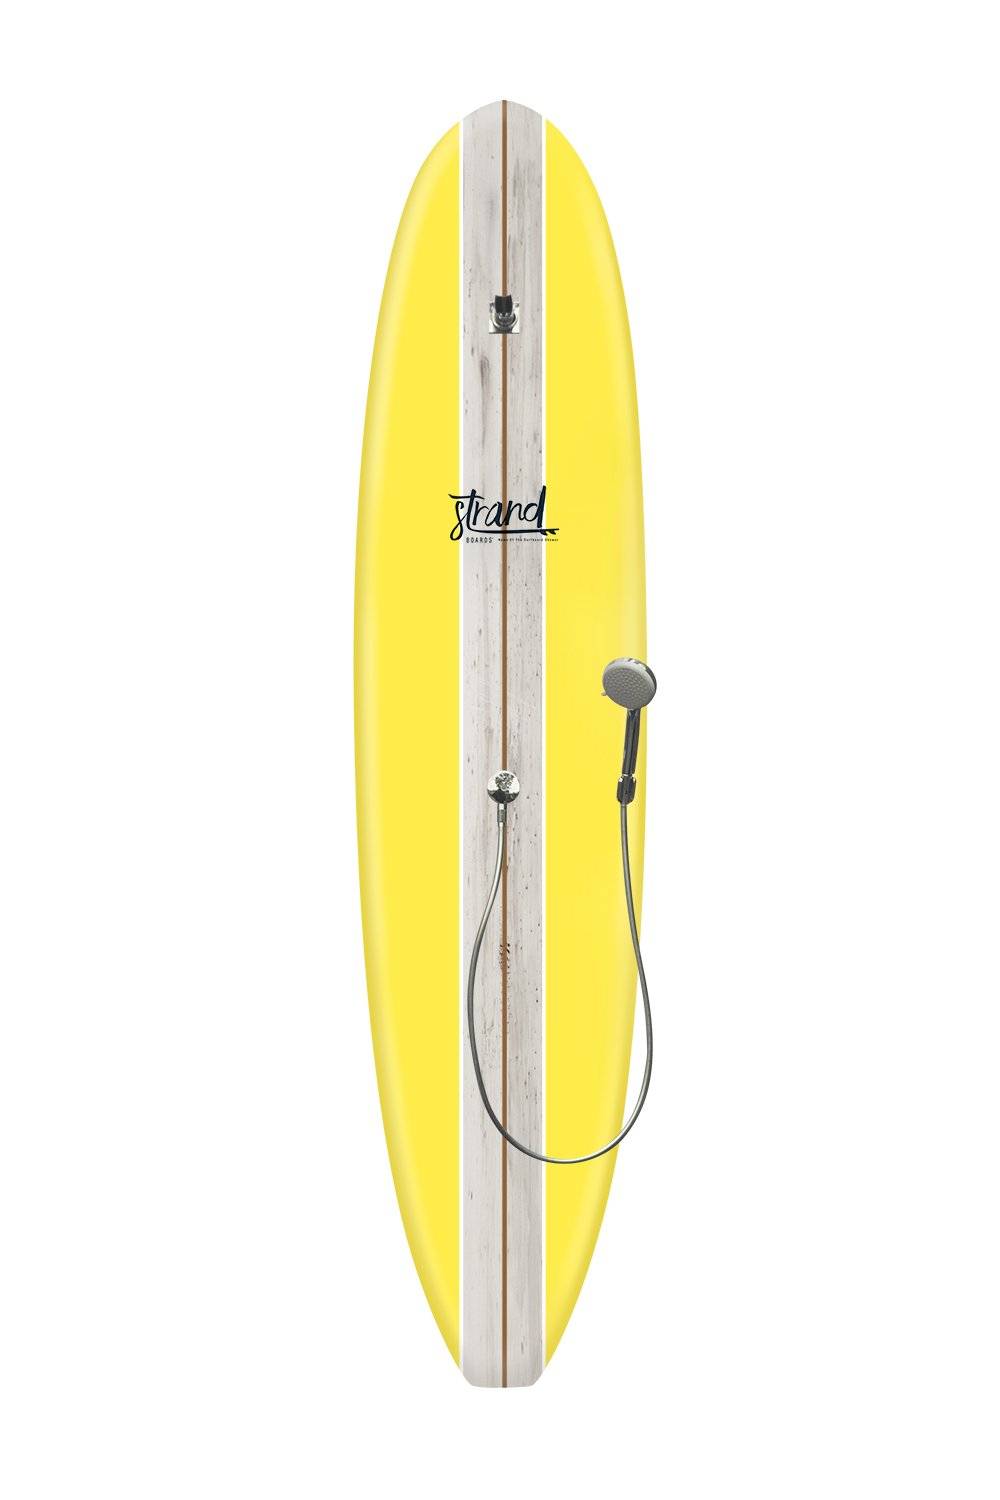 Strand Boards® | Strand Series | Barbados Surfboard Outdoor Shower | Sole Component